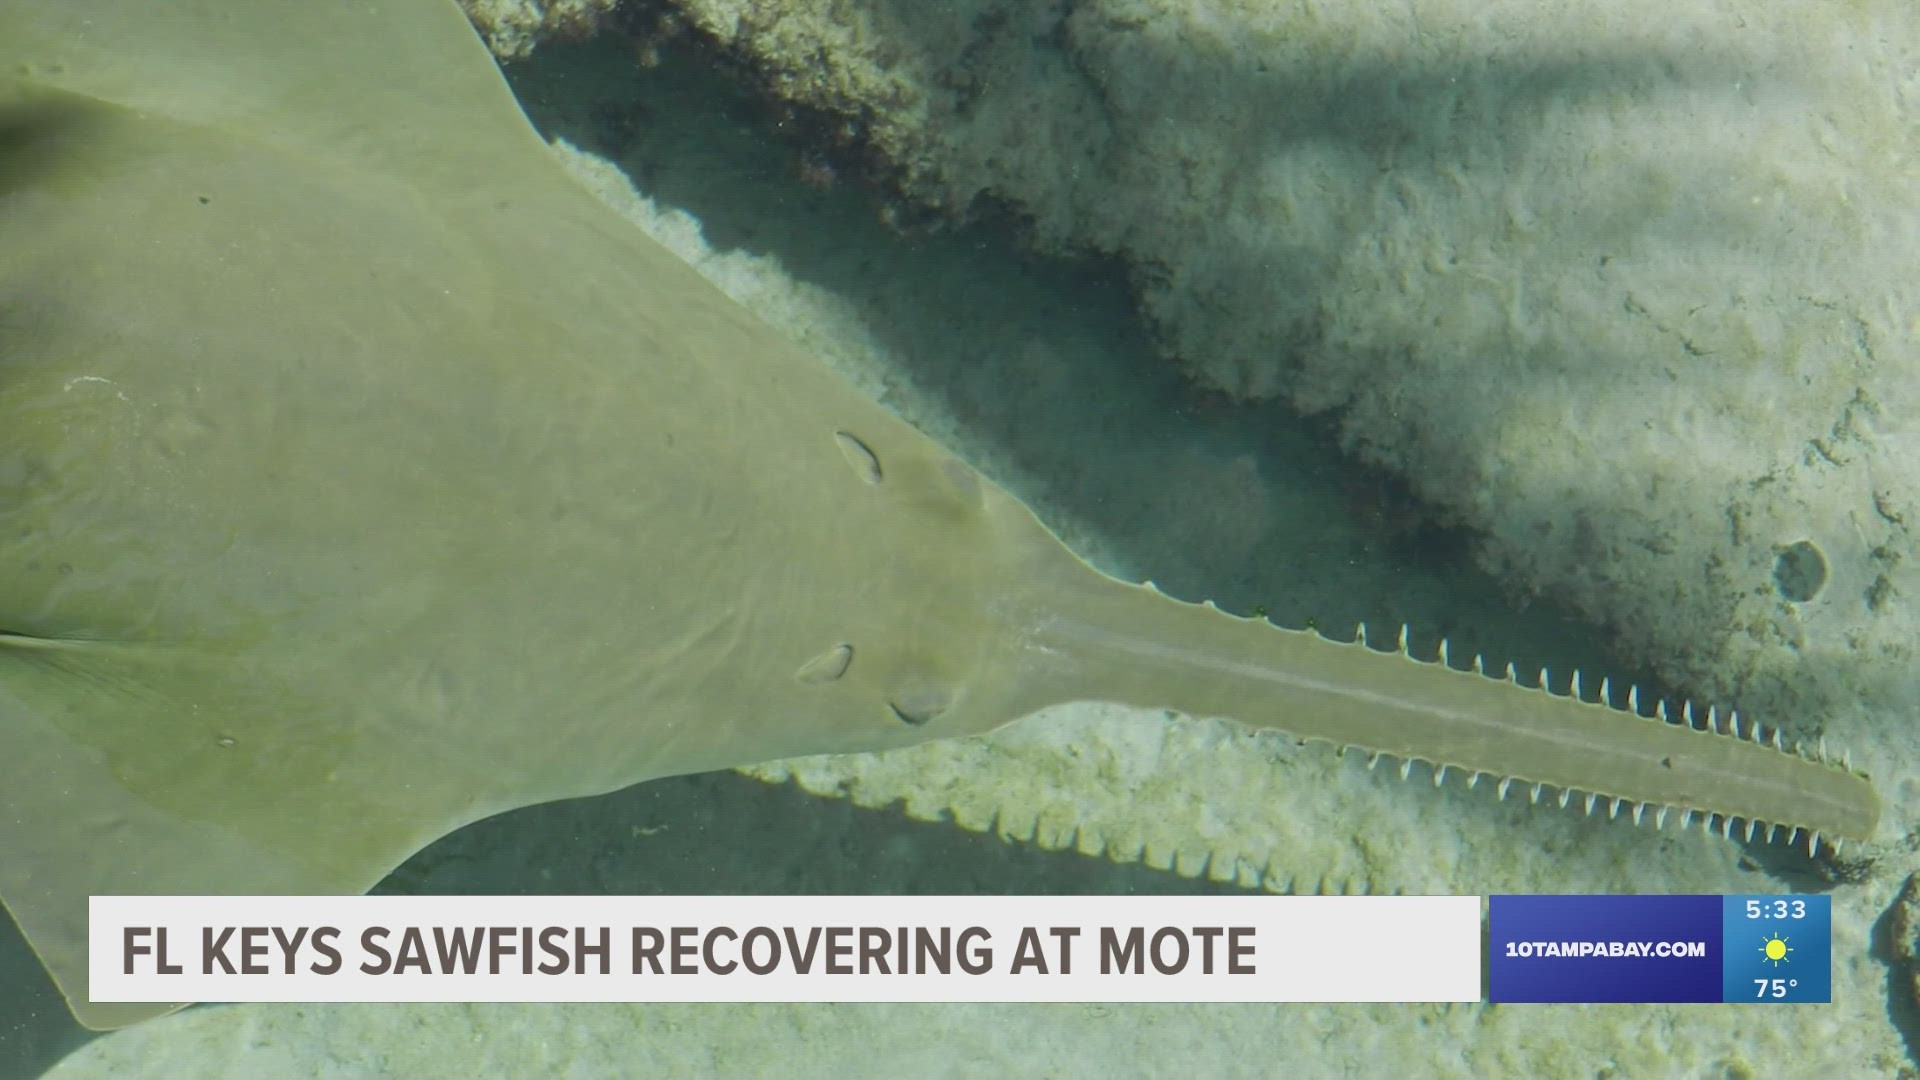 The sawfish was rescued on April 5.